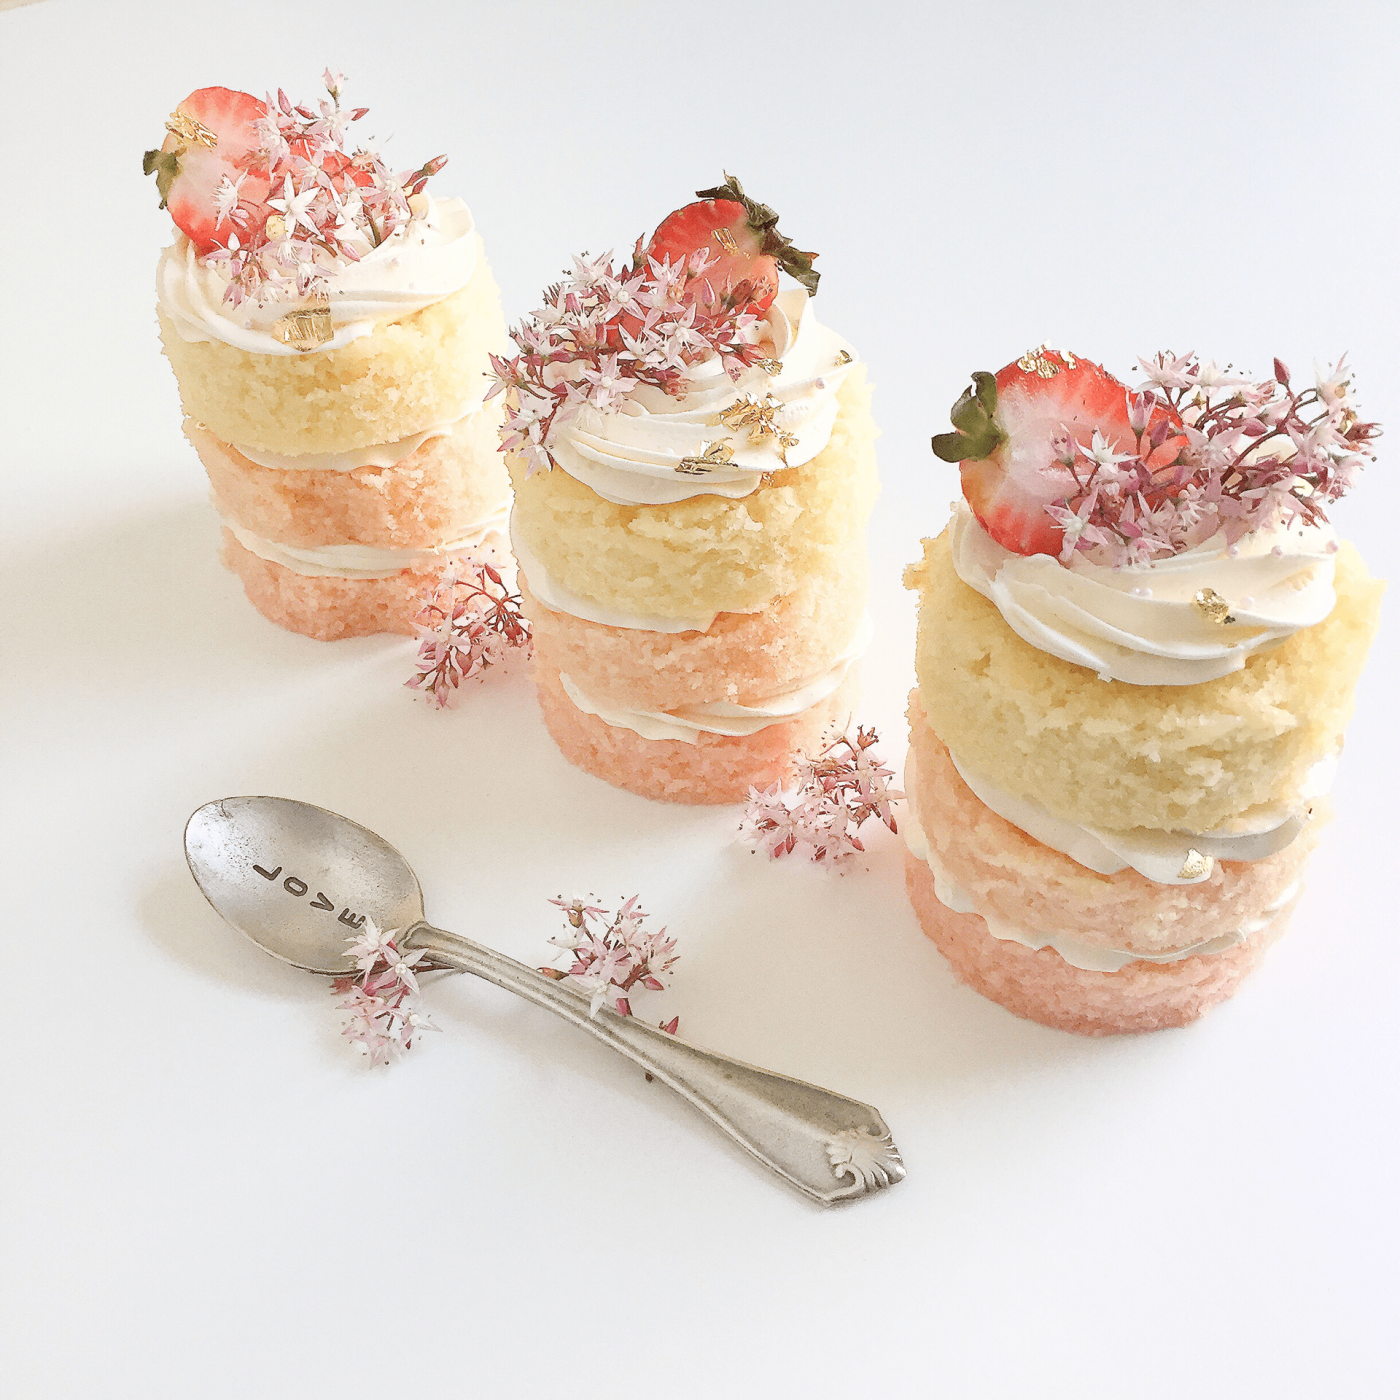 I made this mini cakes for Mother's Day and they were a total success! Vanilla cake with vanilla Swiss meringue buttercream and one of my spoons from the "Wishes" collection.